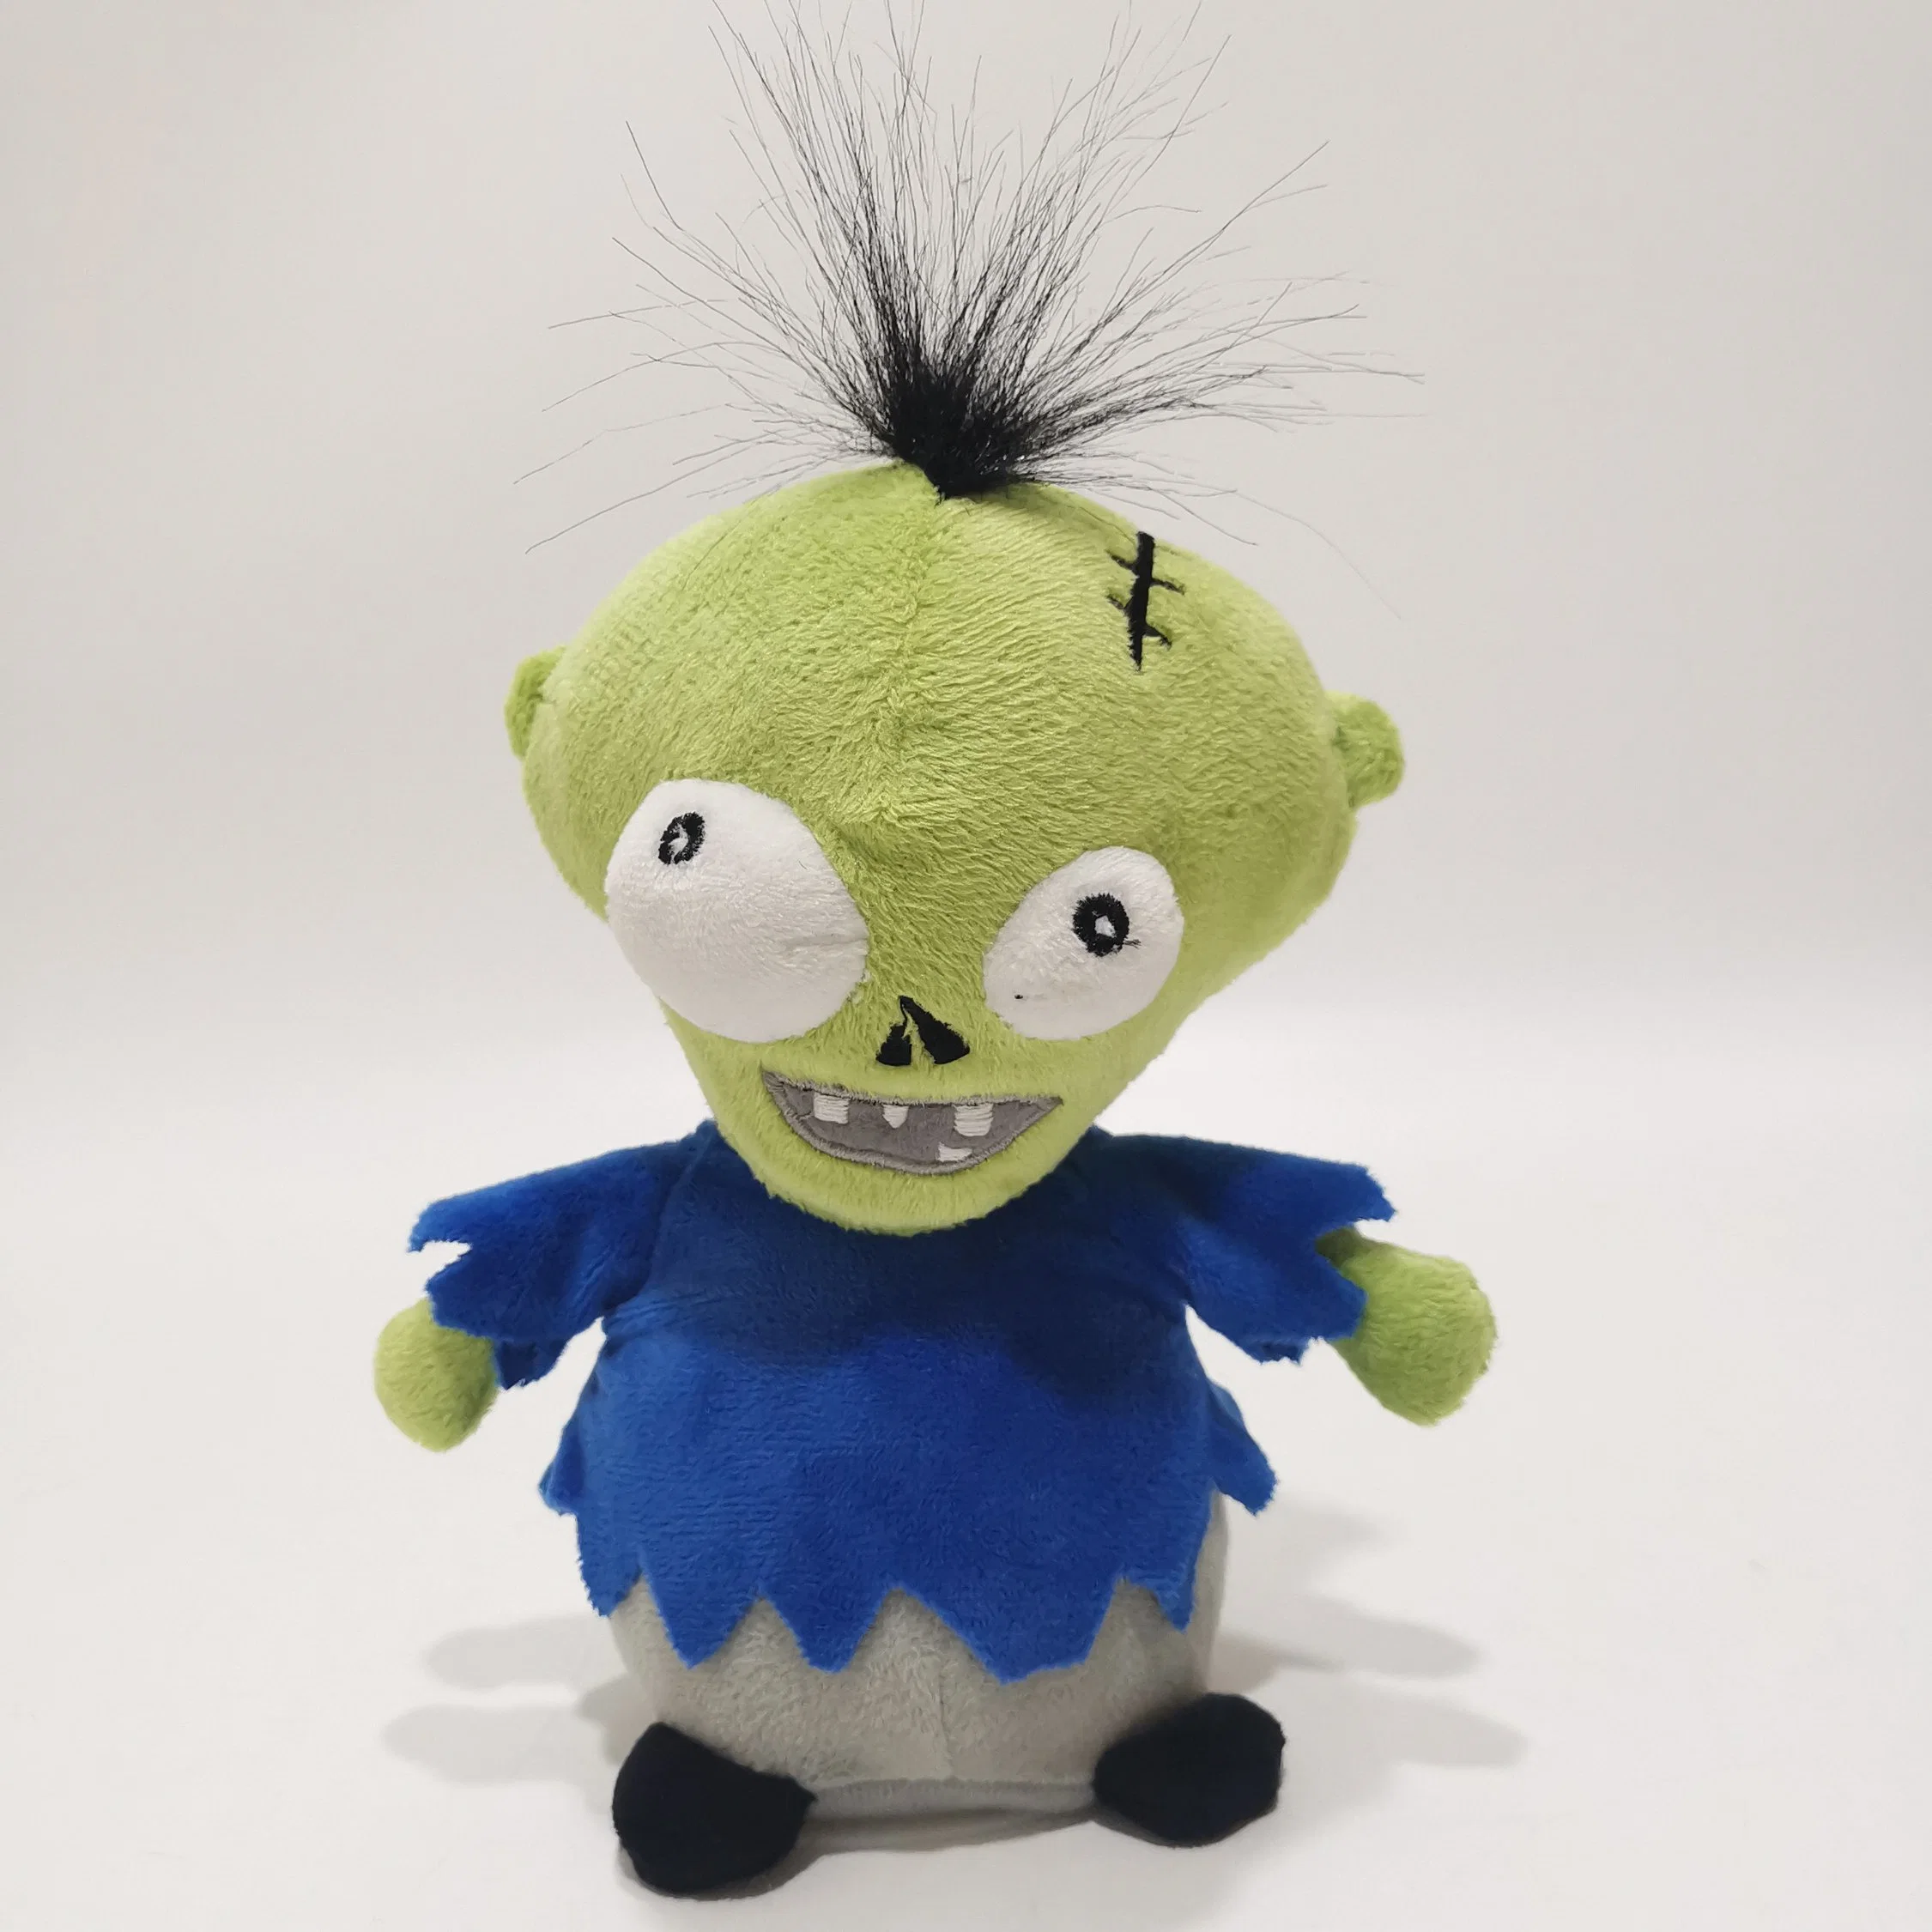 Halloween New Plush Recording & Repeating Zombie Toy Talking Back Item for Decoration & Fun